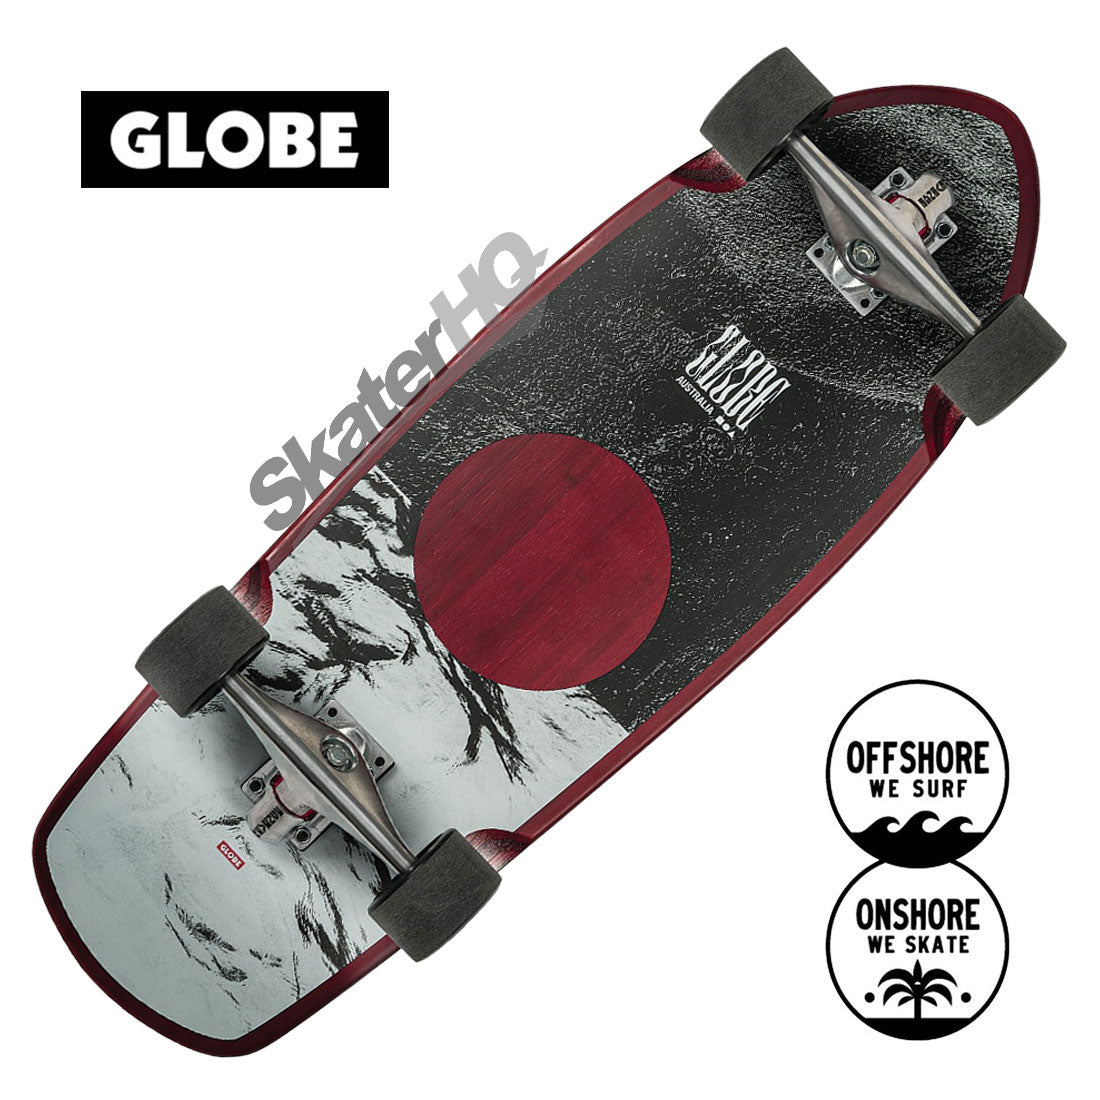 Globe Stubby 30 Complete - On Shore/Cherry Bamboo Skateboard Compl Carving and Specialty